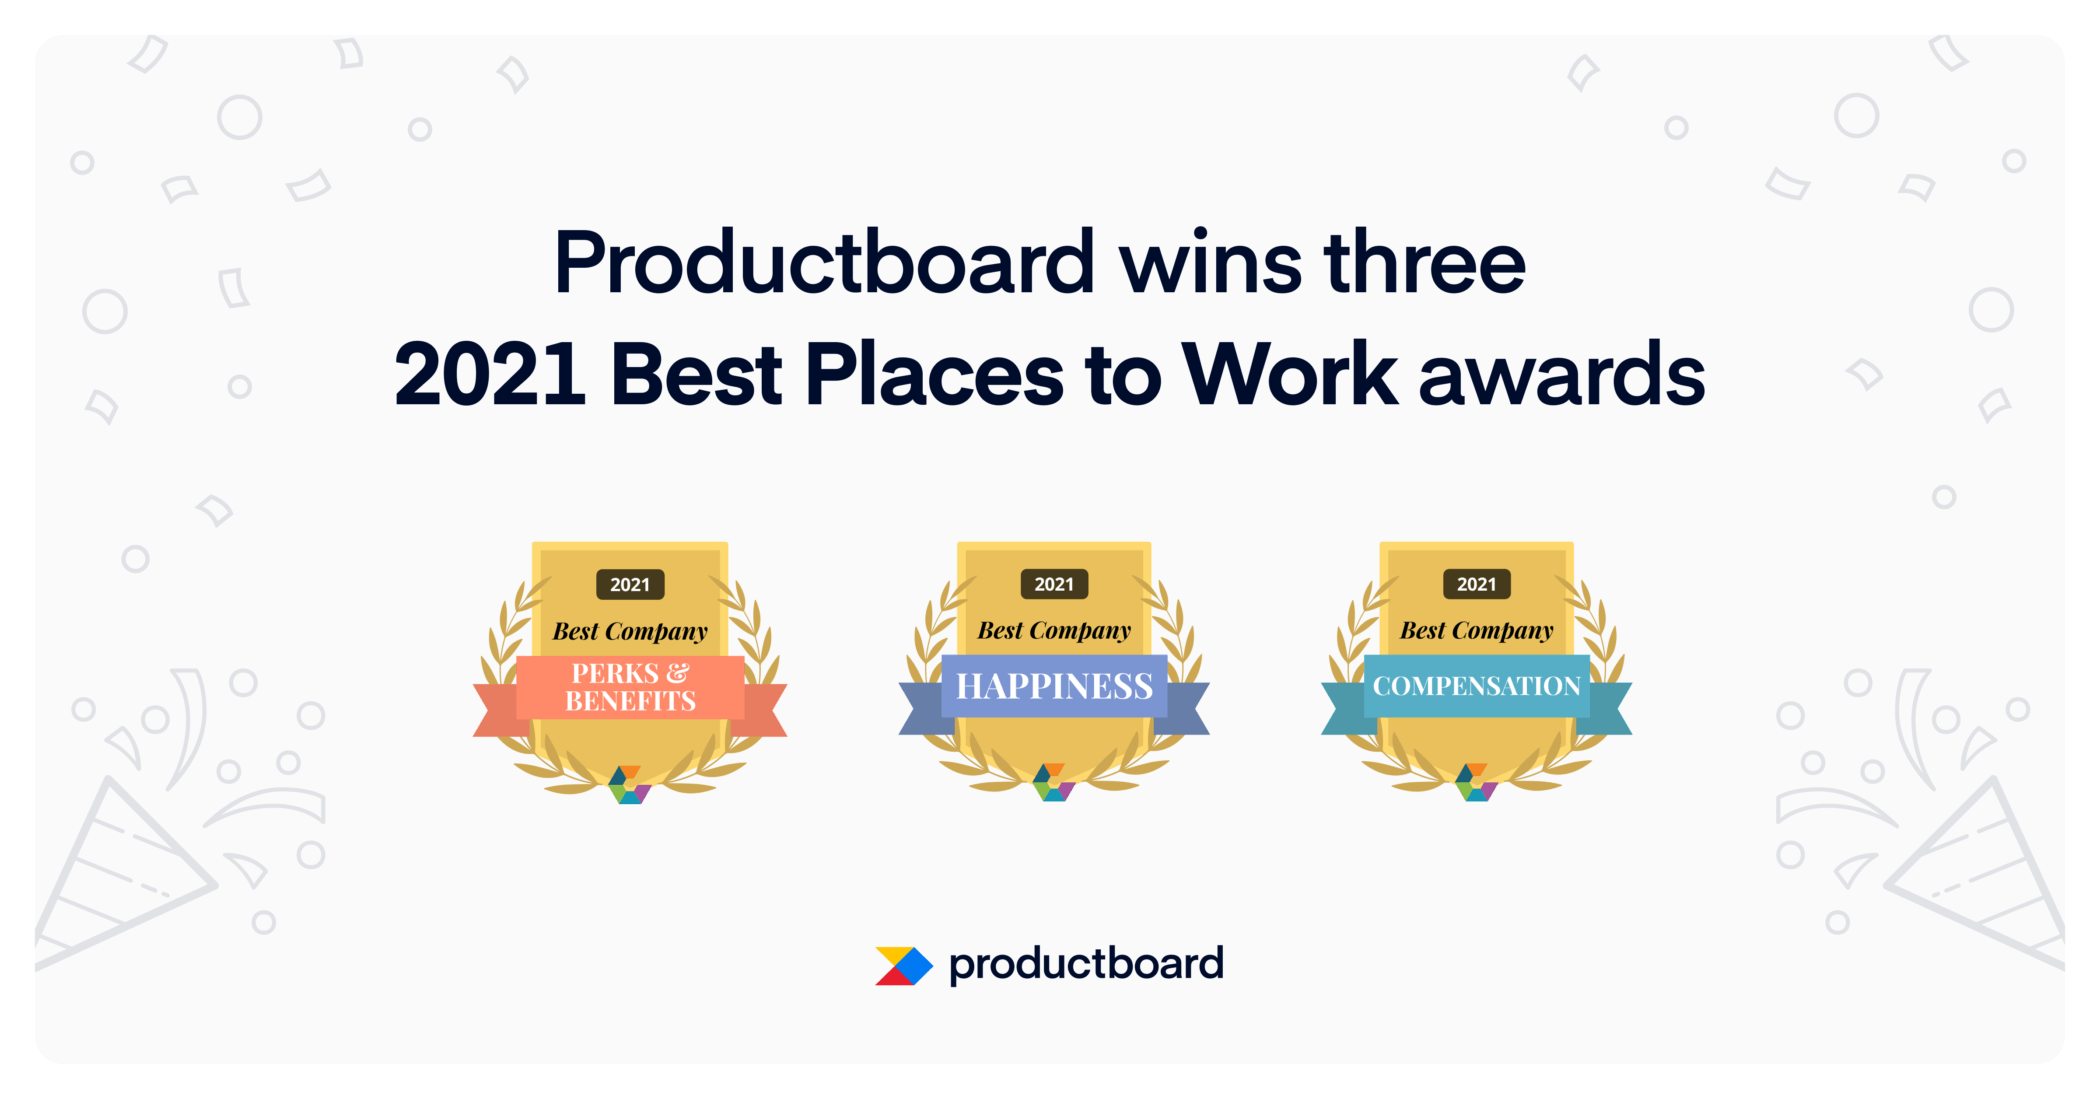 Productboard wins three more “Best Places to Work” awards from Comparably